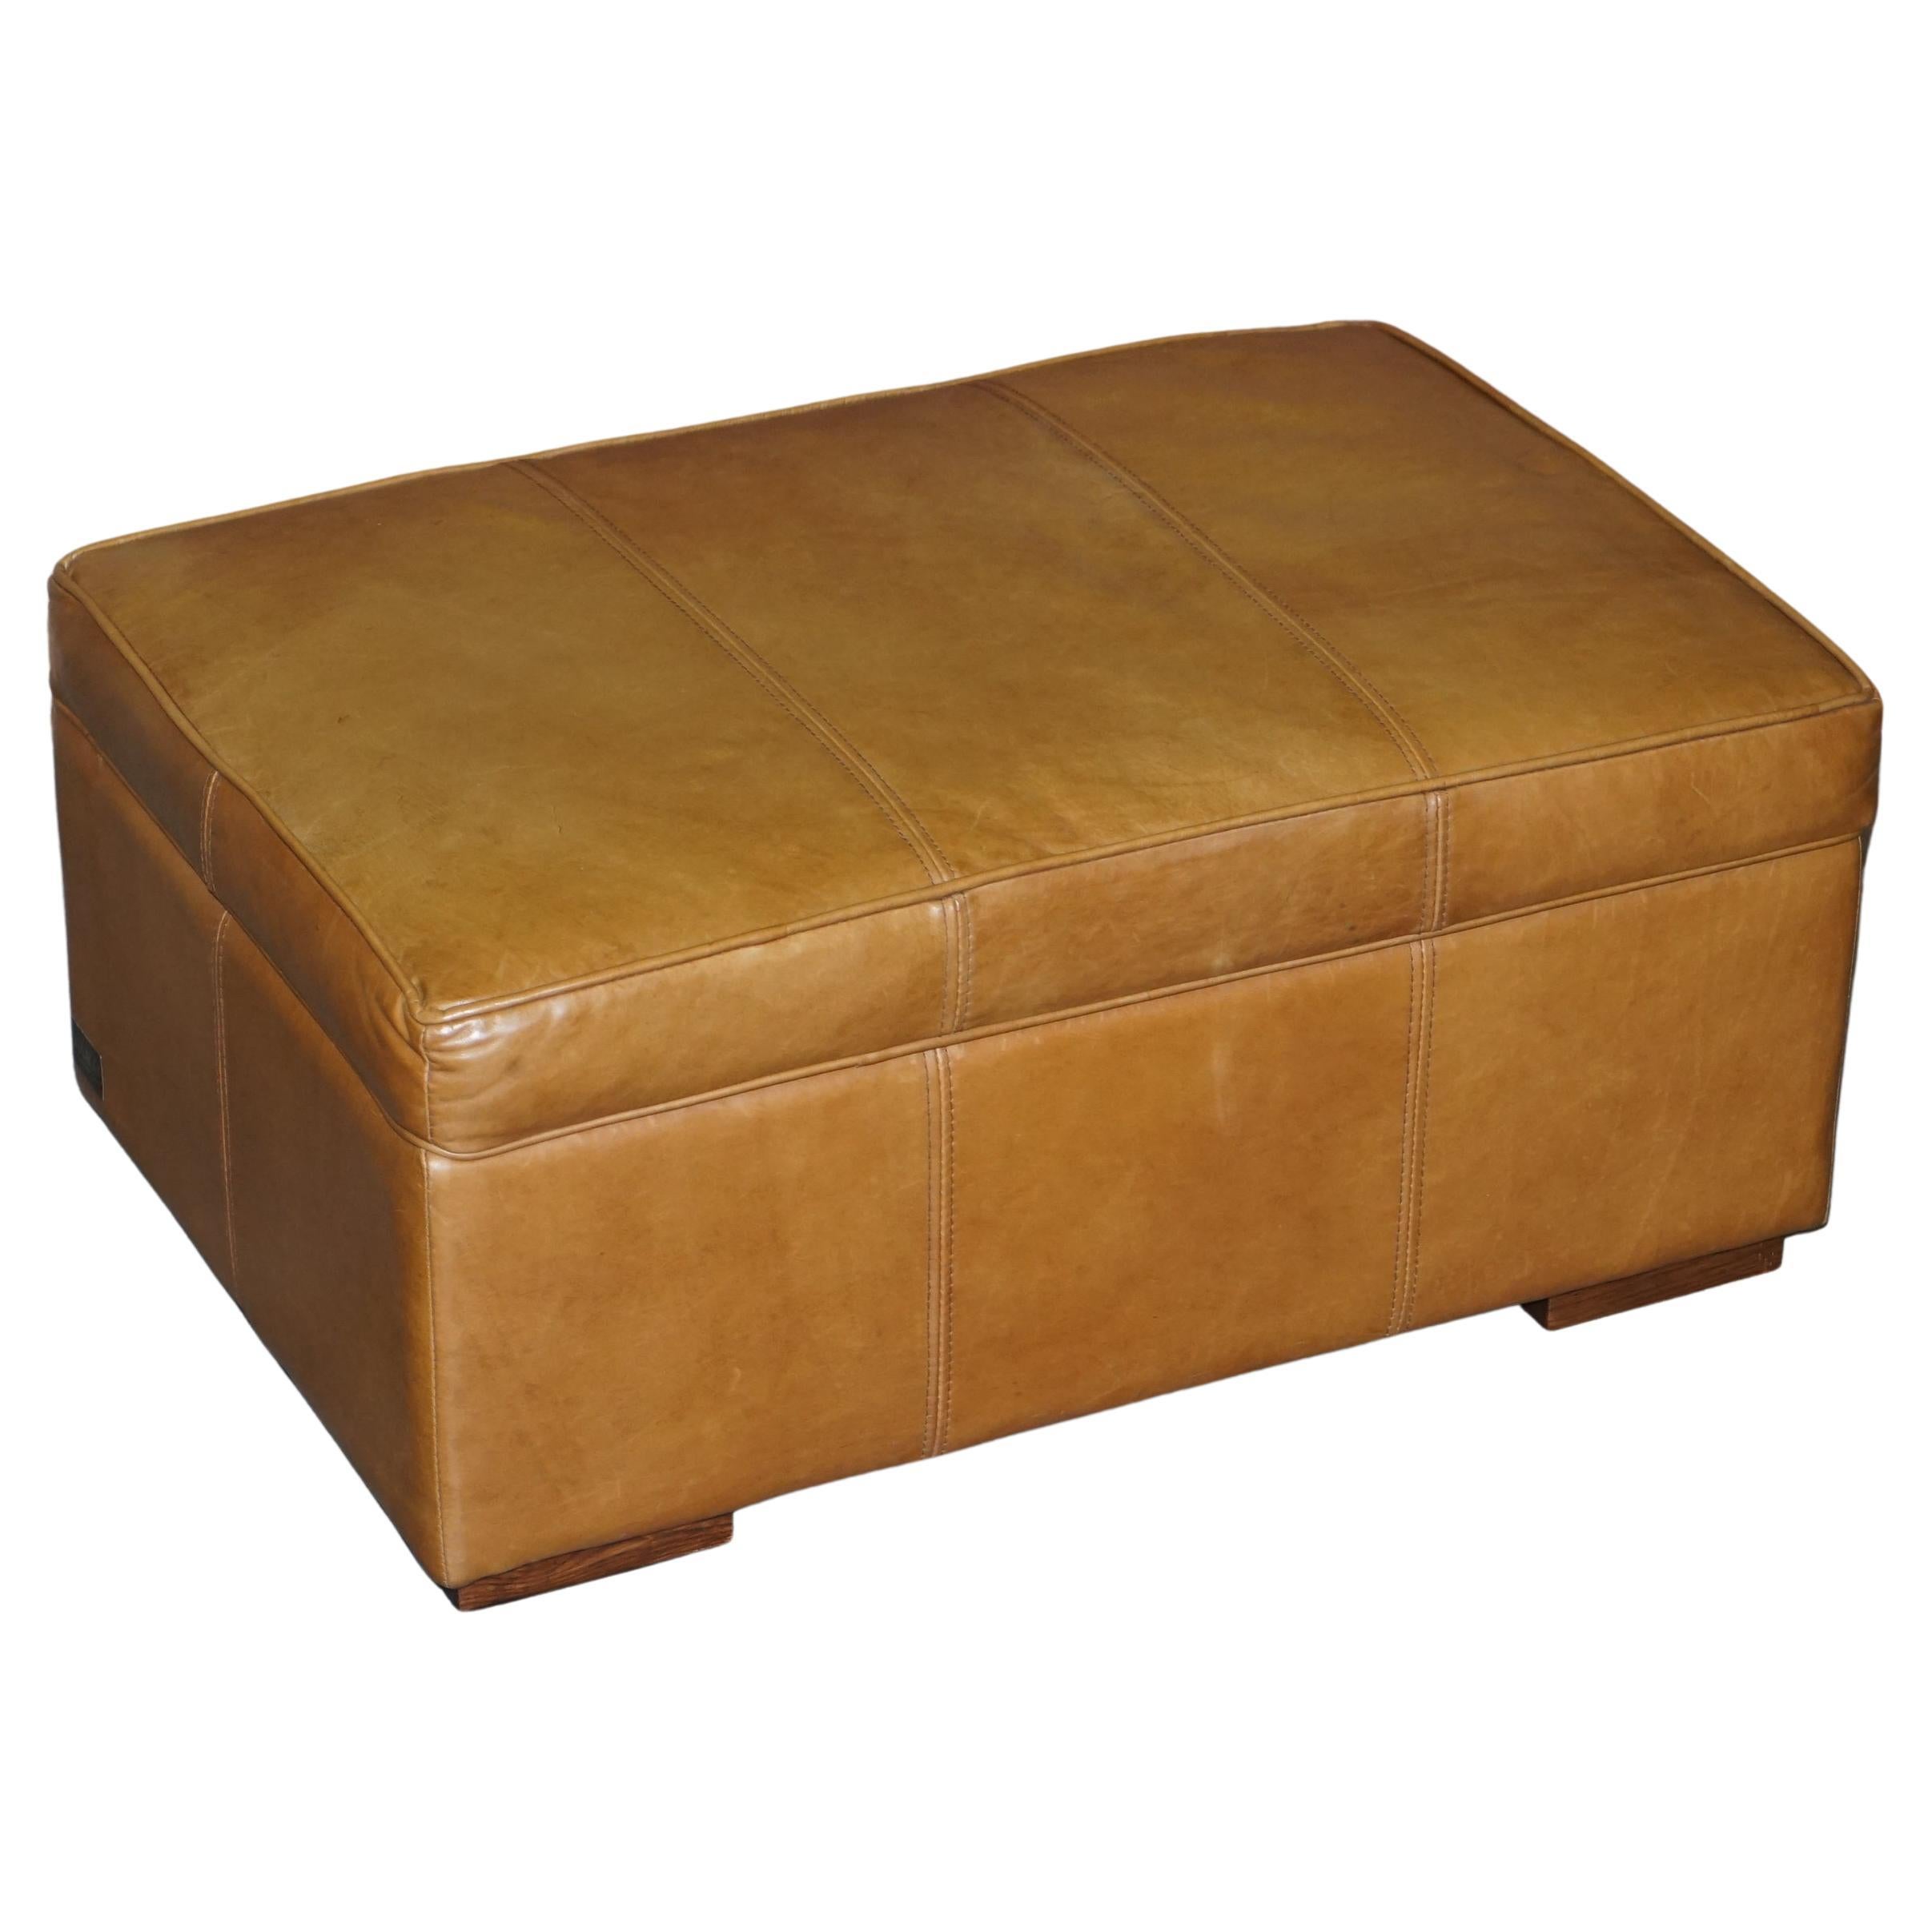 Halo Grouch Reggio Tan Brown Leather Large Ottoman Footstool for Four to Share